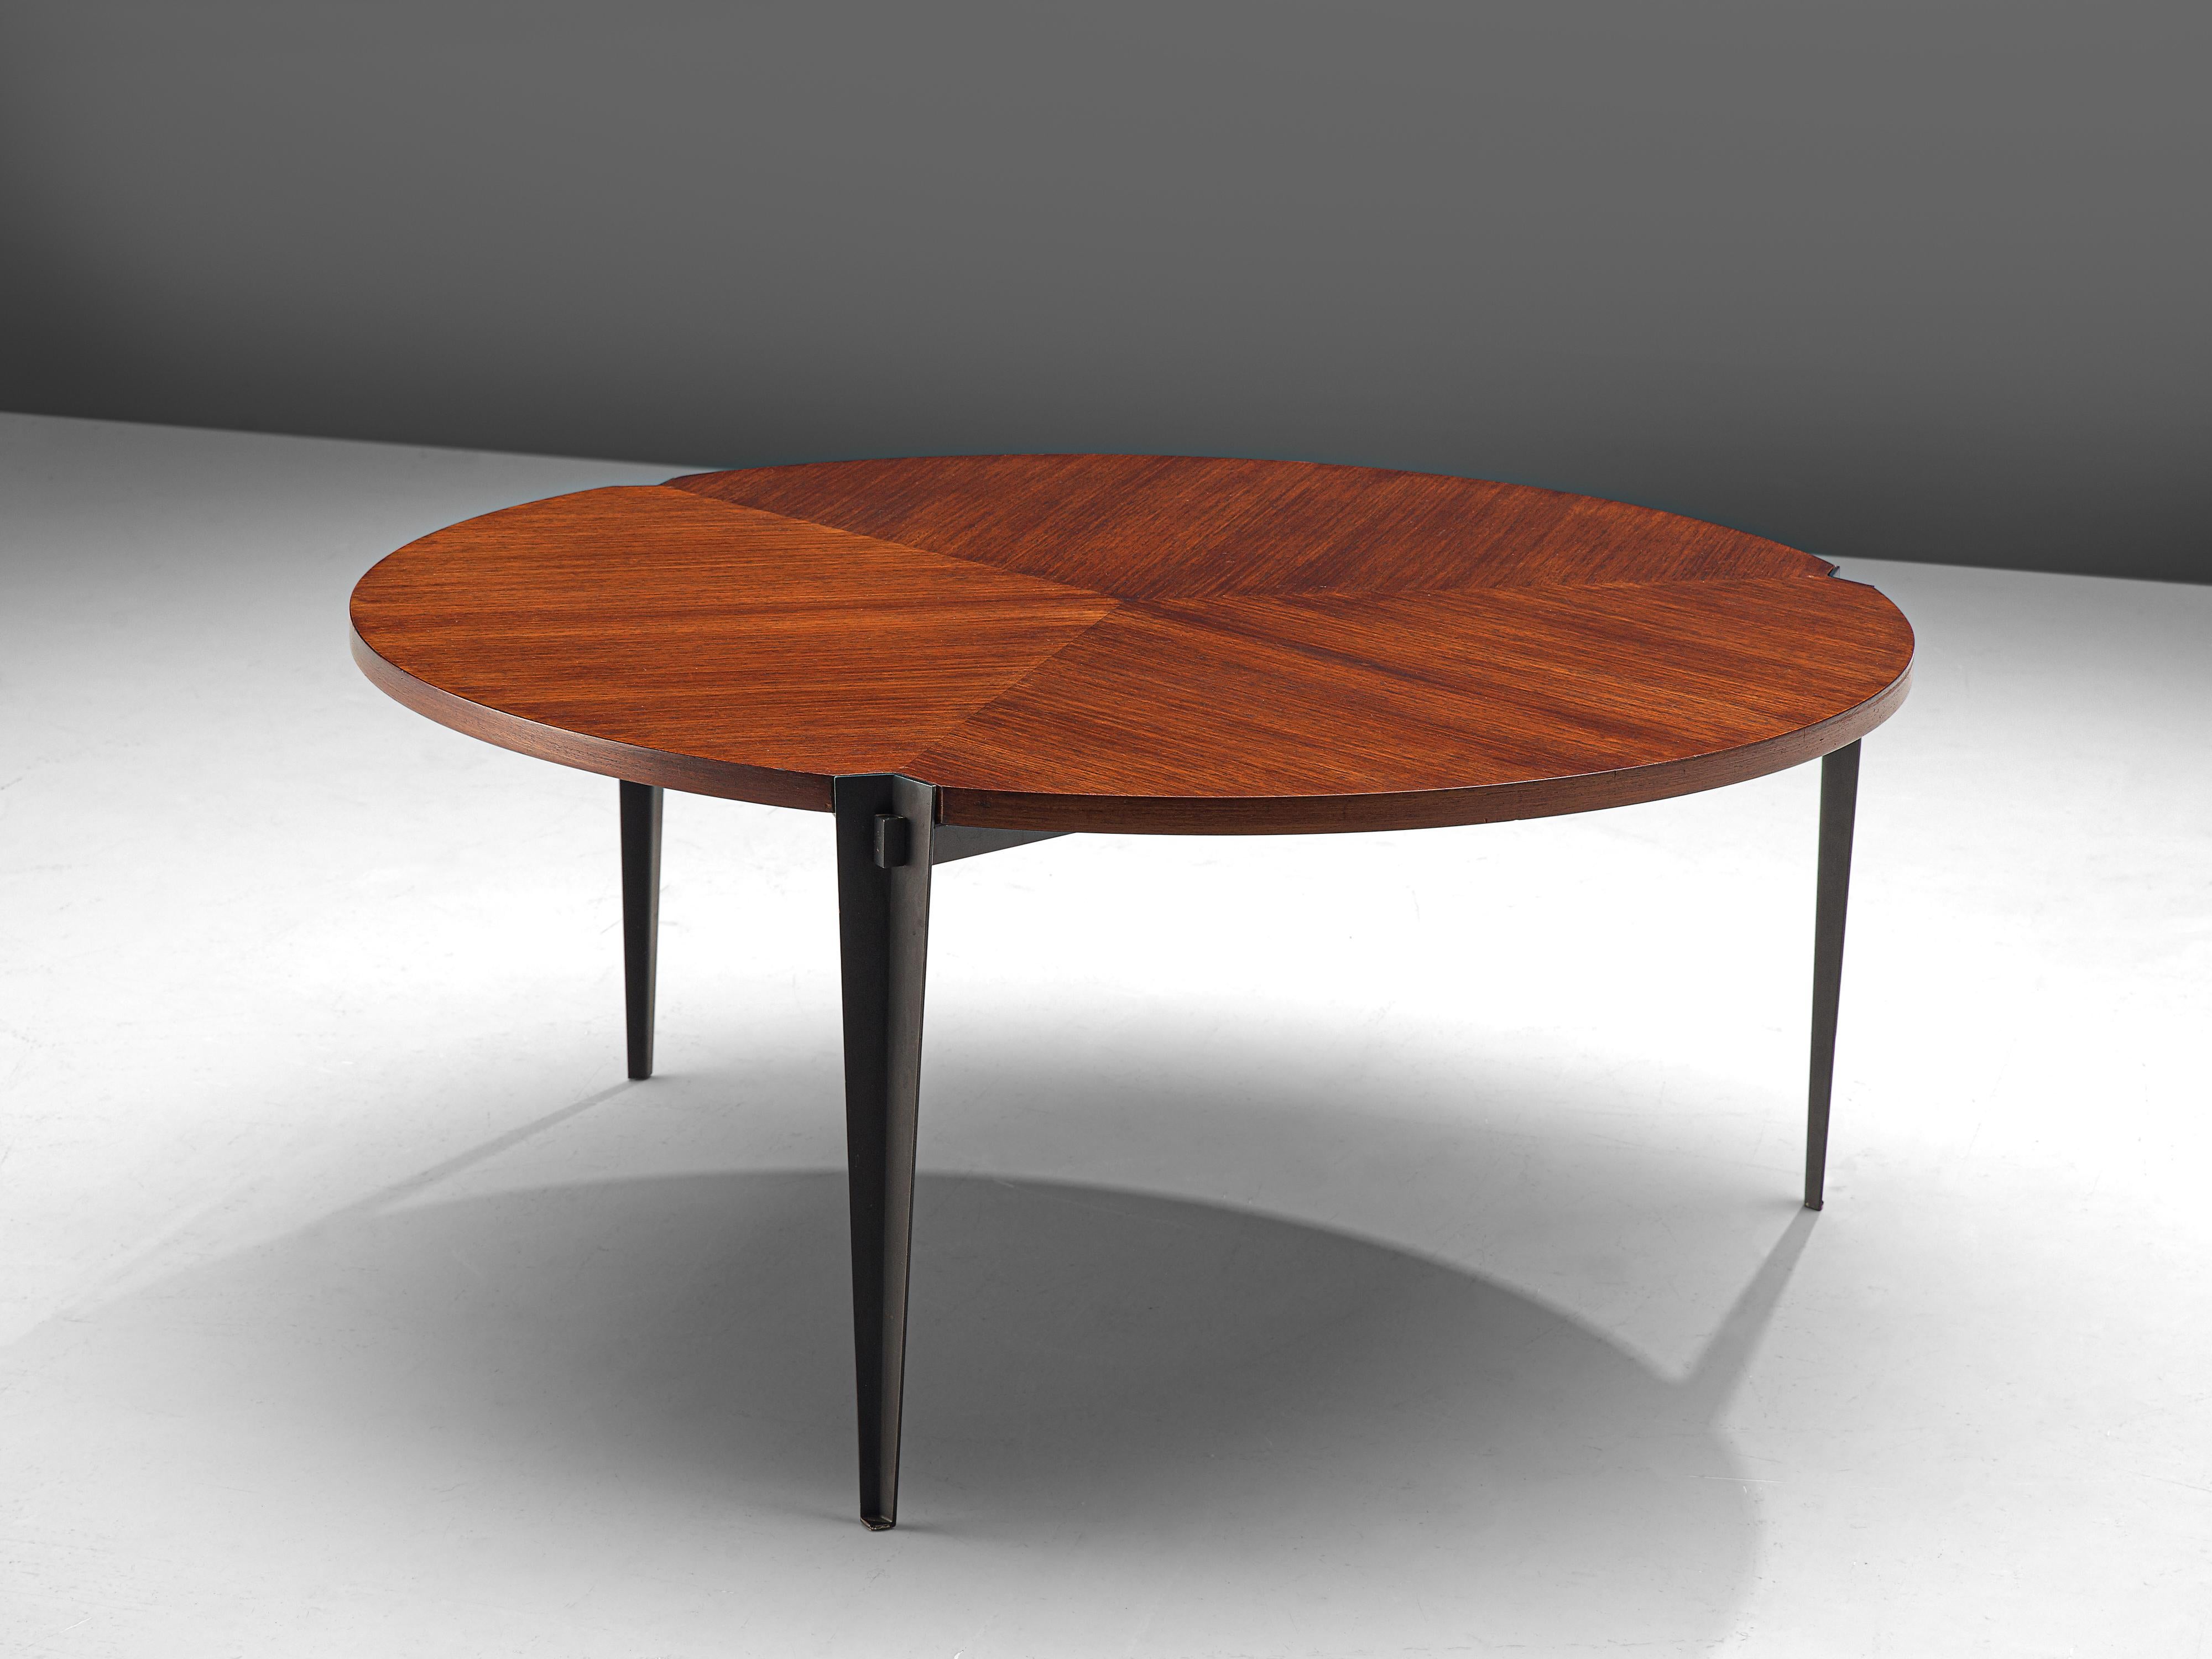 Osvaldo Borsani for Tecno, coffee table model 'T61', teak, metal, Italy, design 1957.

Elegant coffee table designed by Osvaldo Borsani and produced by Tecno. The table has a round tabletop of teak veneer, which is inlayed in a triangular shape. The